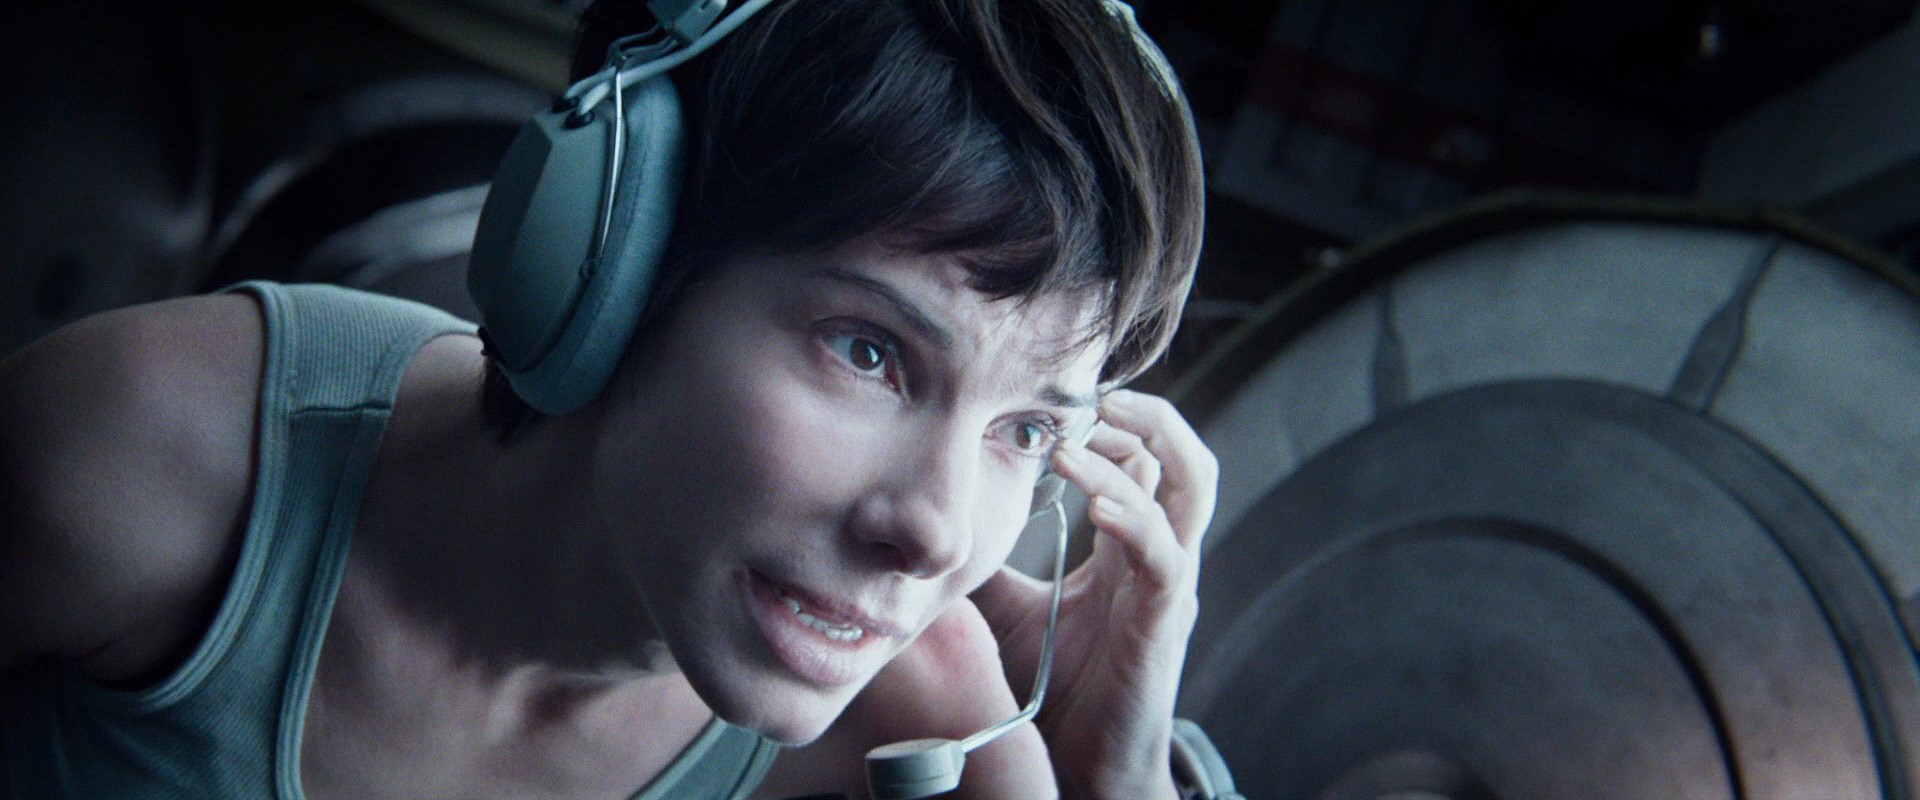 bande annonce gravity hd torrent